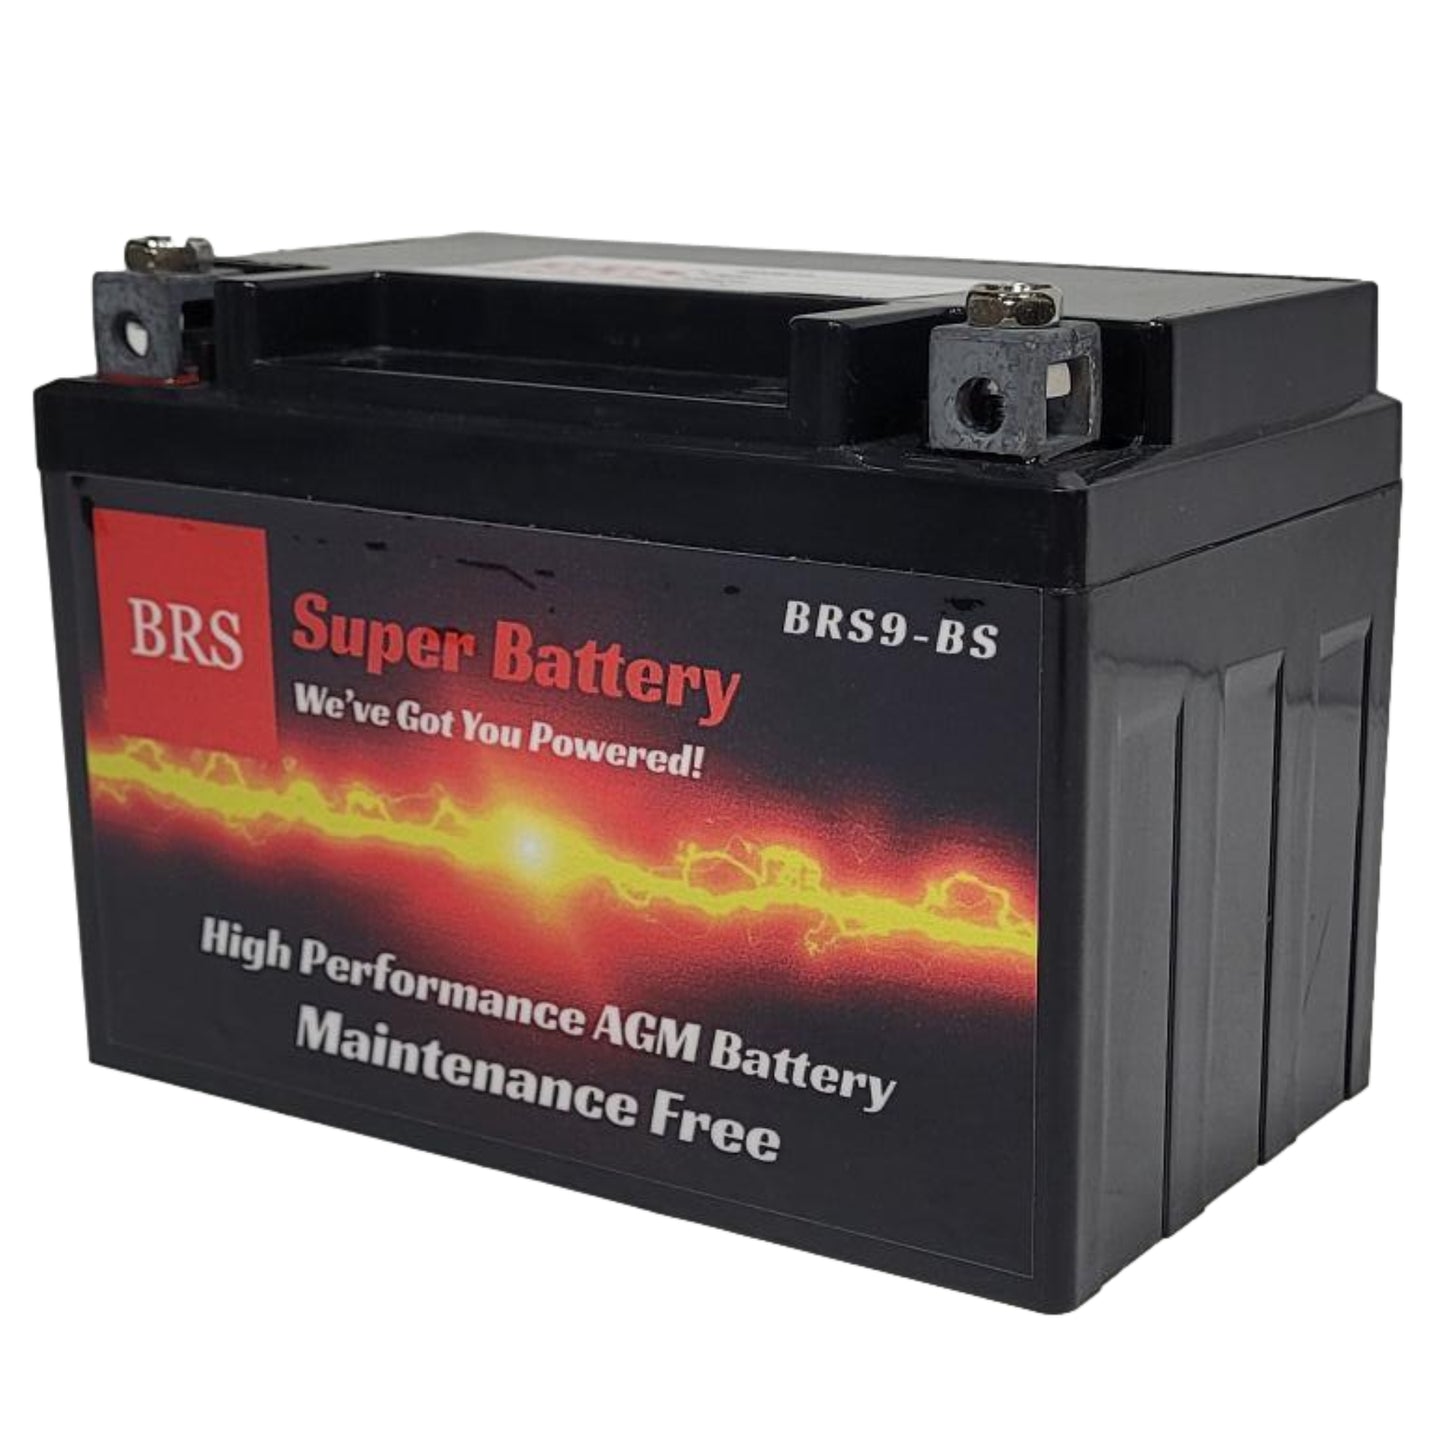 WPX9-BS 12v High Performance Sealed AGM PowerSport 2 Year Battery - BRS Super Battery